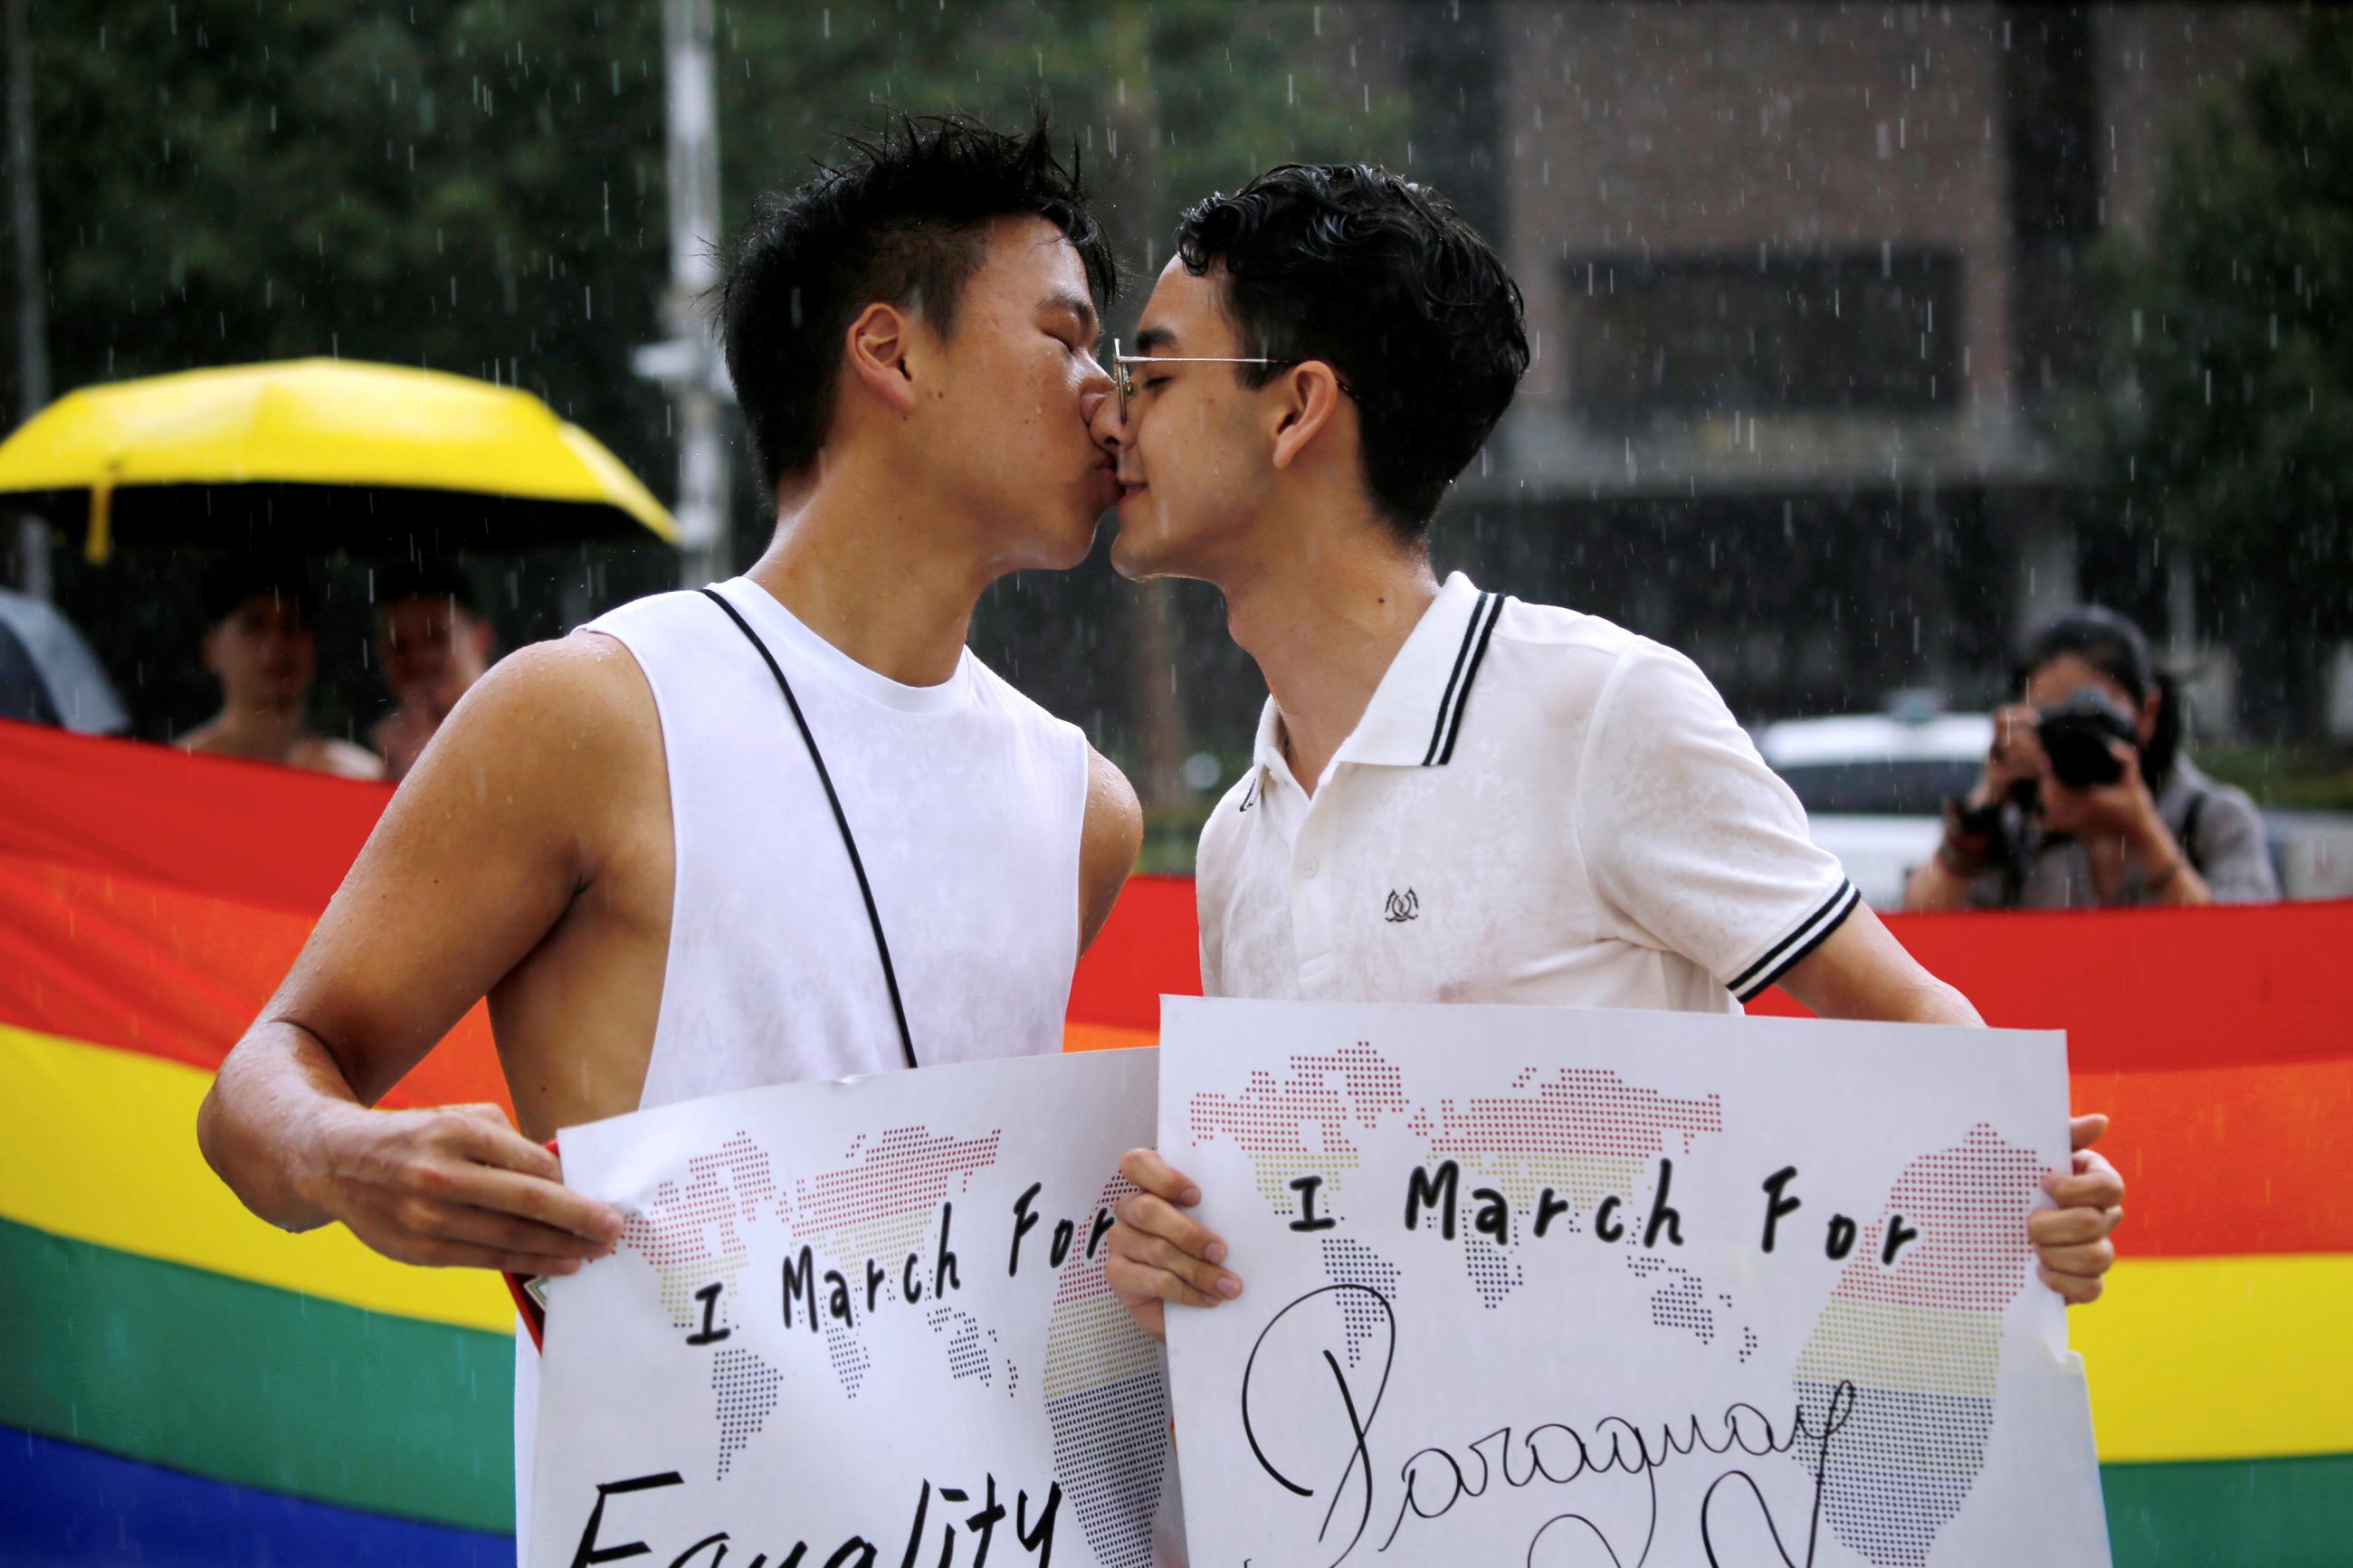 Participants kiss for a photo during the "Taiwan Pride Parade For the World" rally in Taipei, Taiwan, June 28, 2020.